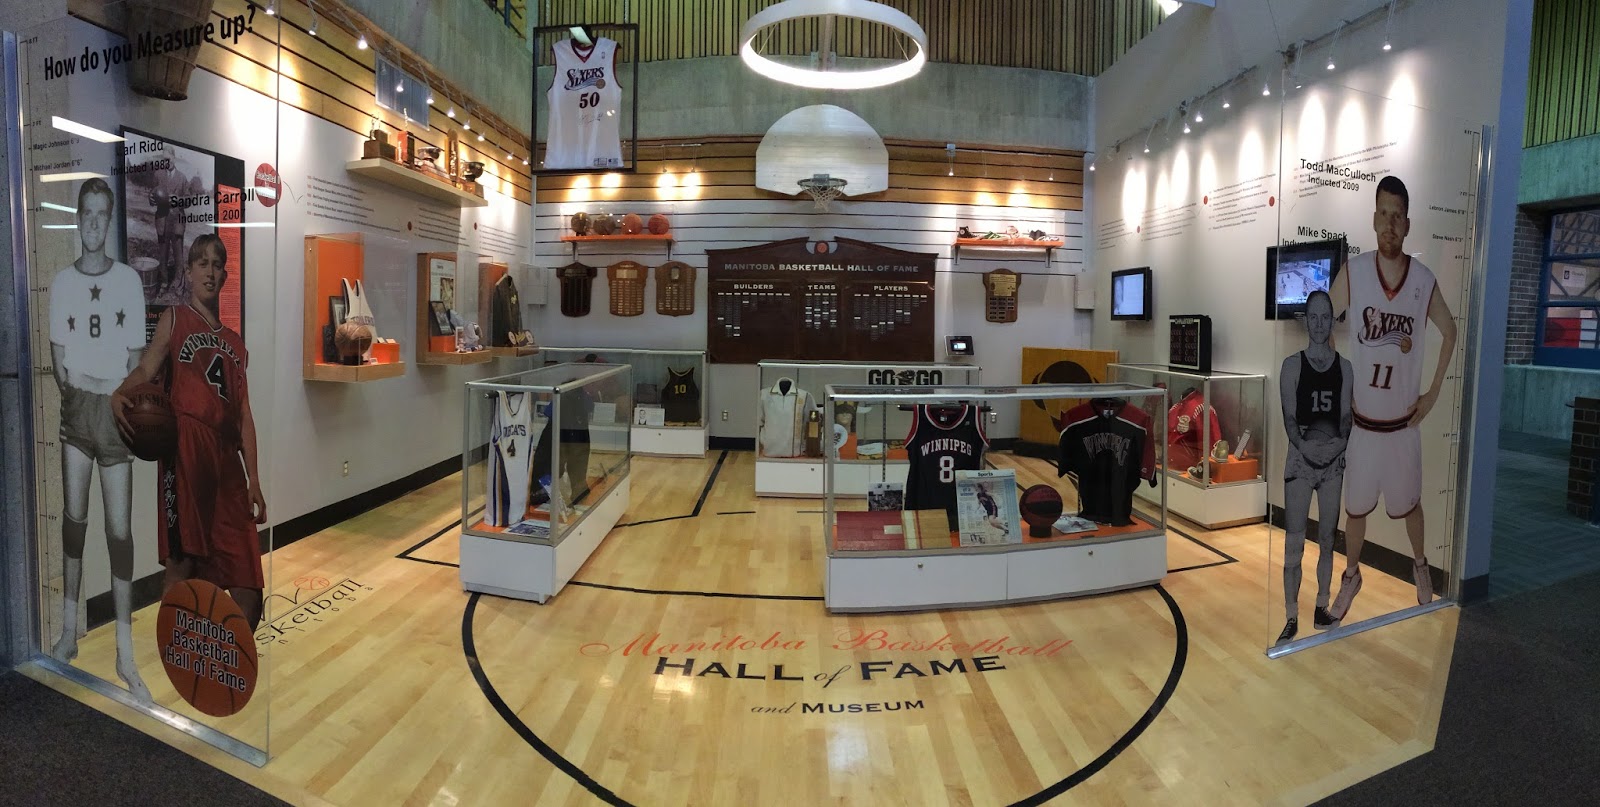 Manitoba Basketball Hall of Fame to Announce 2015 Induction Class on